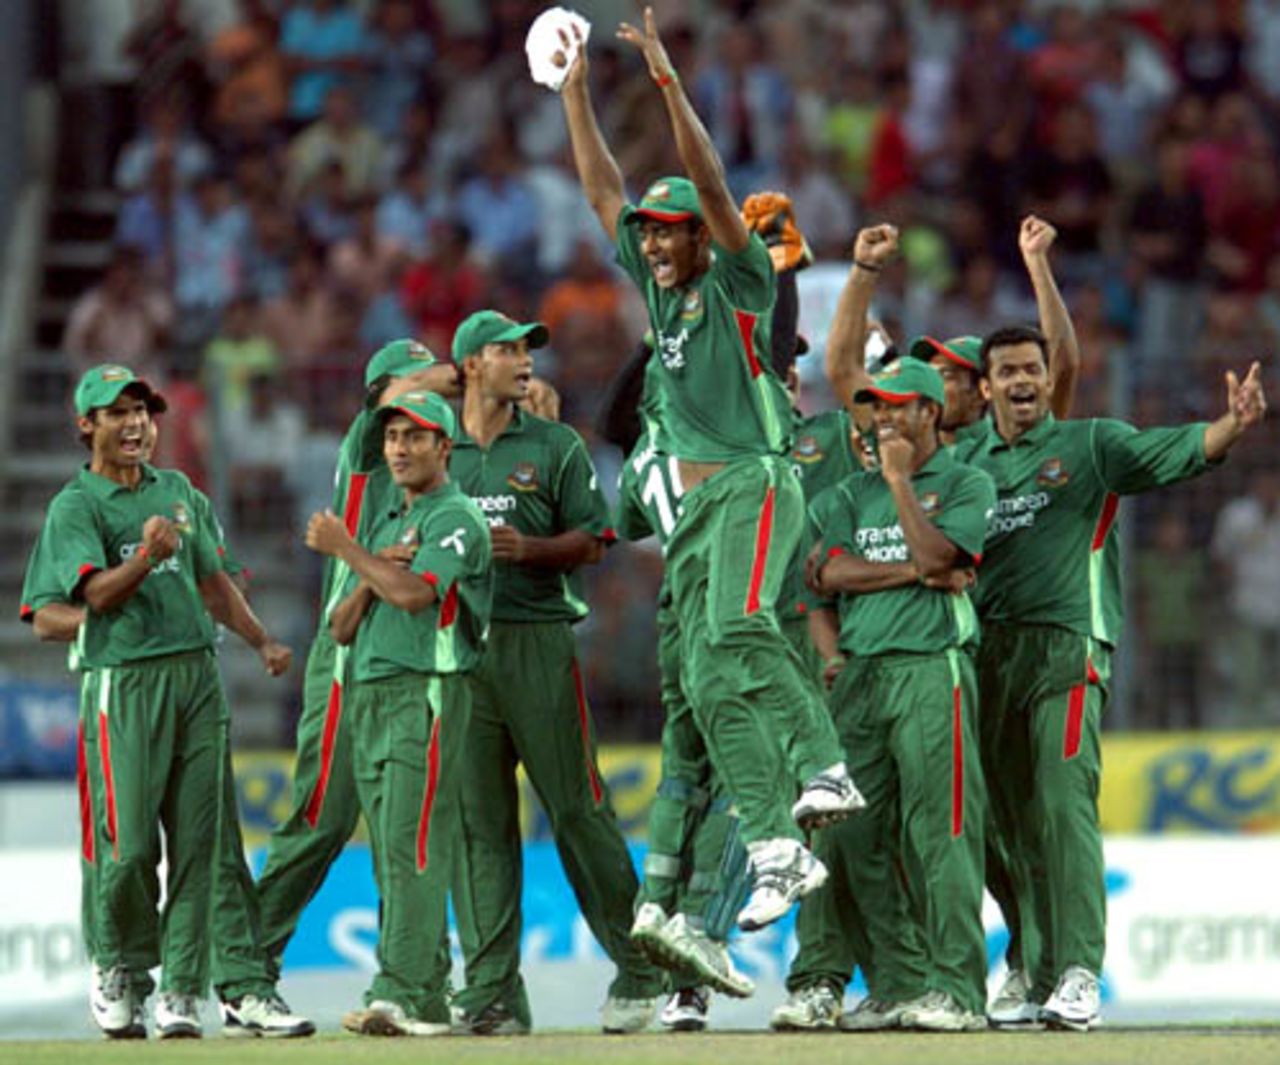 The Bangladesh players celebrate after Younis Khan is given out by the third umpire, Bangladesh v Pakistan, Kitply Cup, Dhaka, June 8, 2008